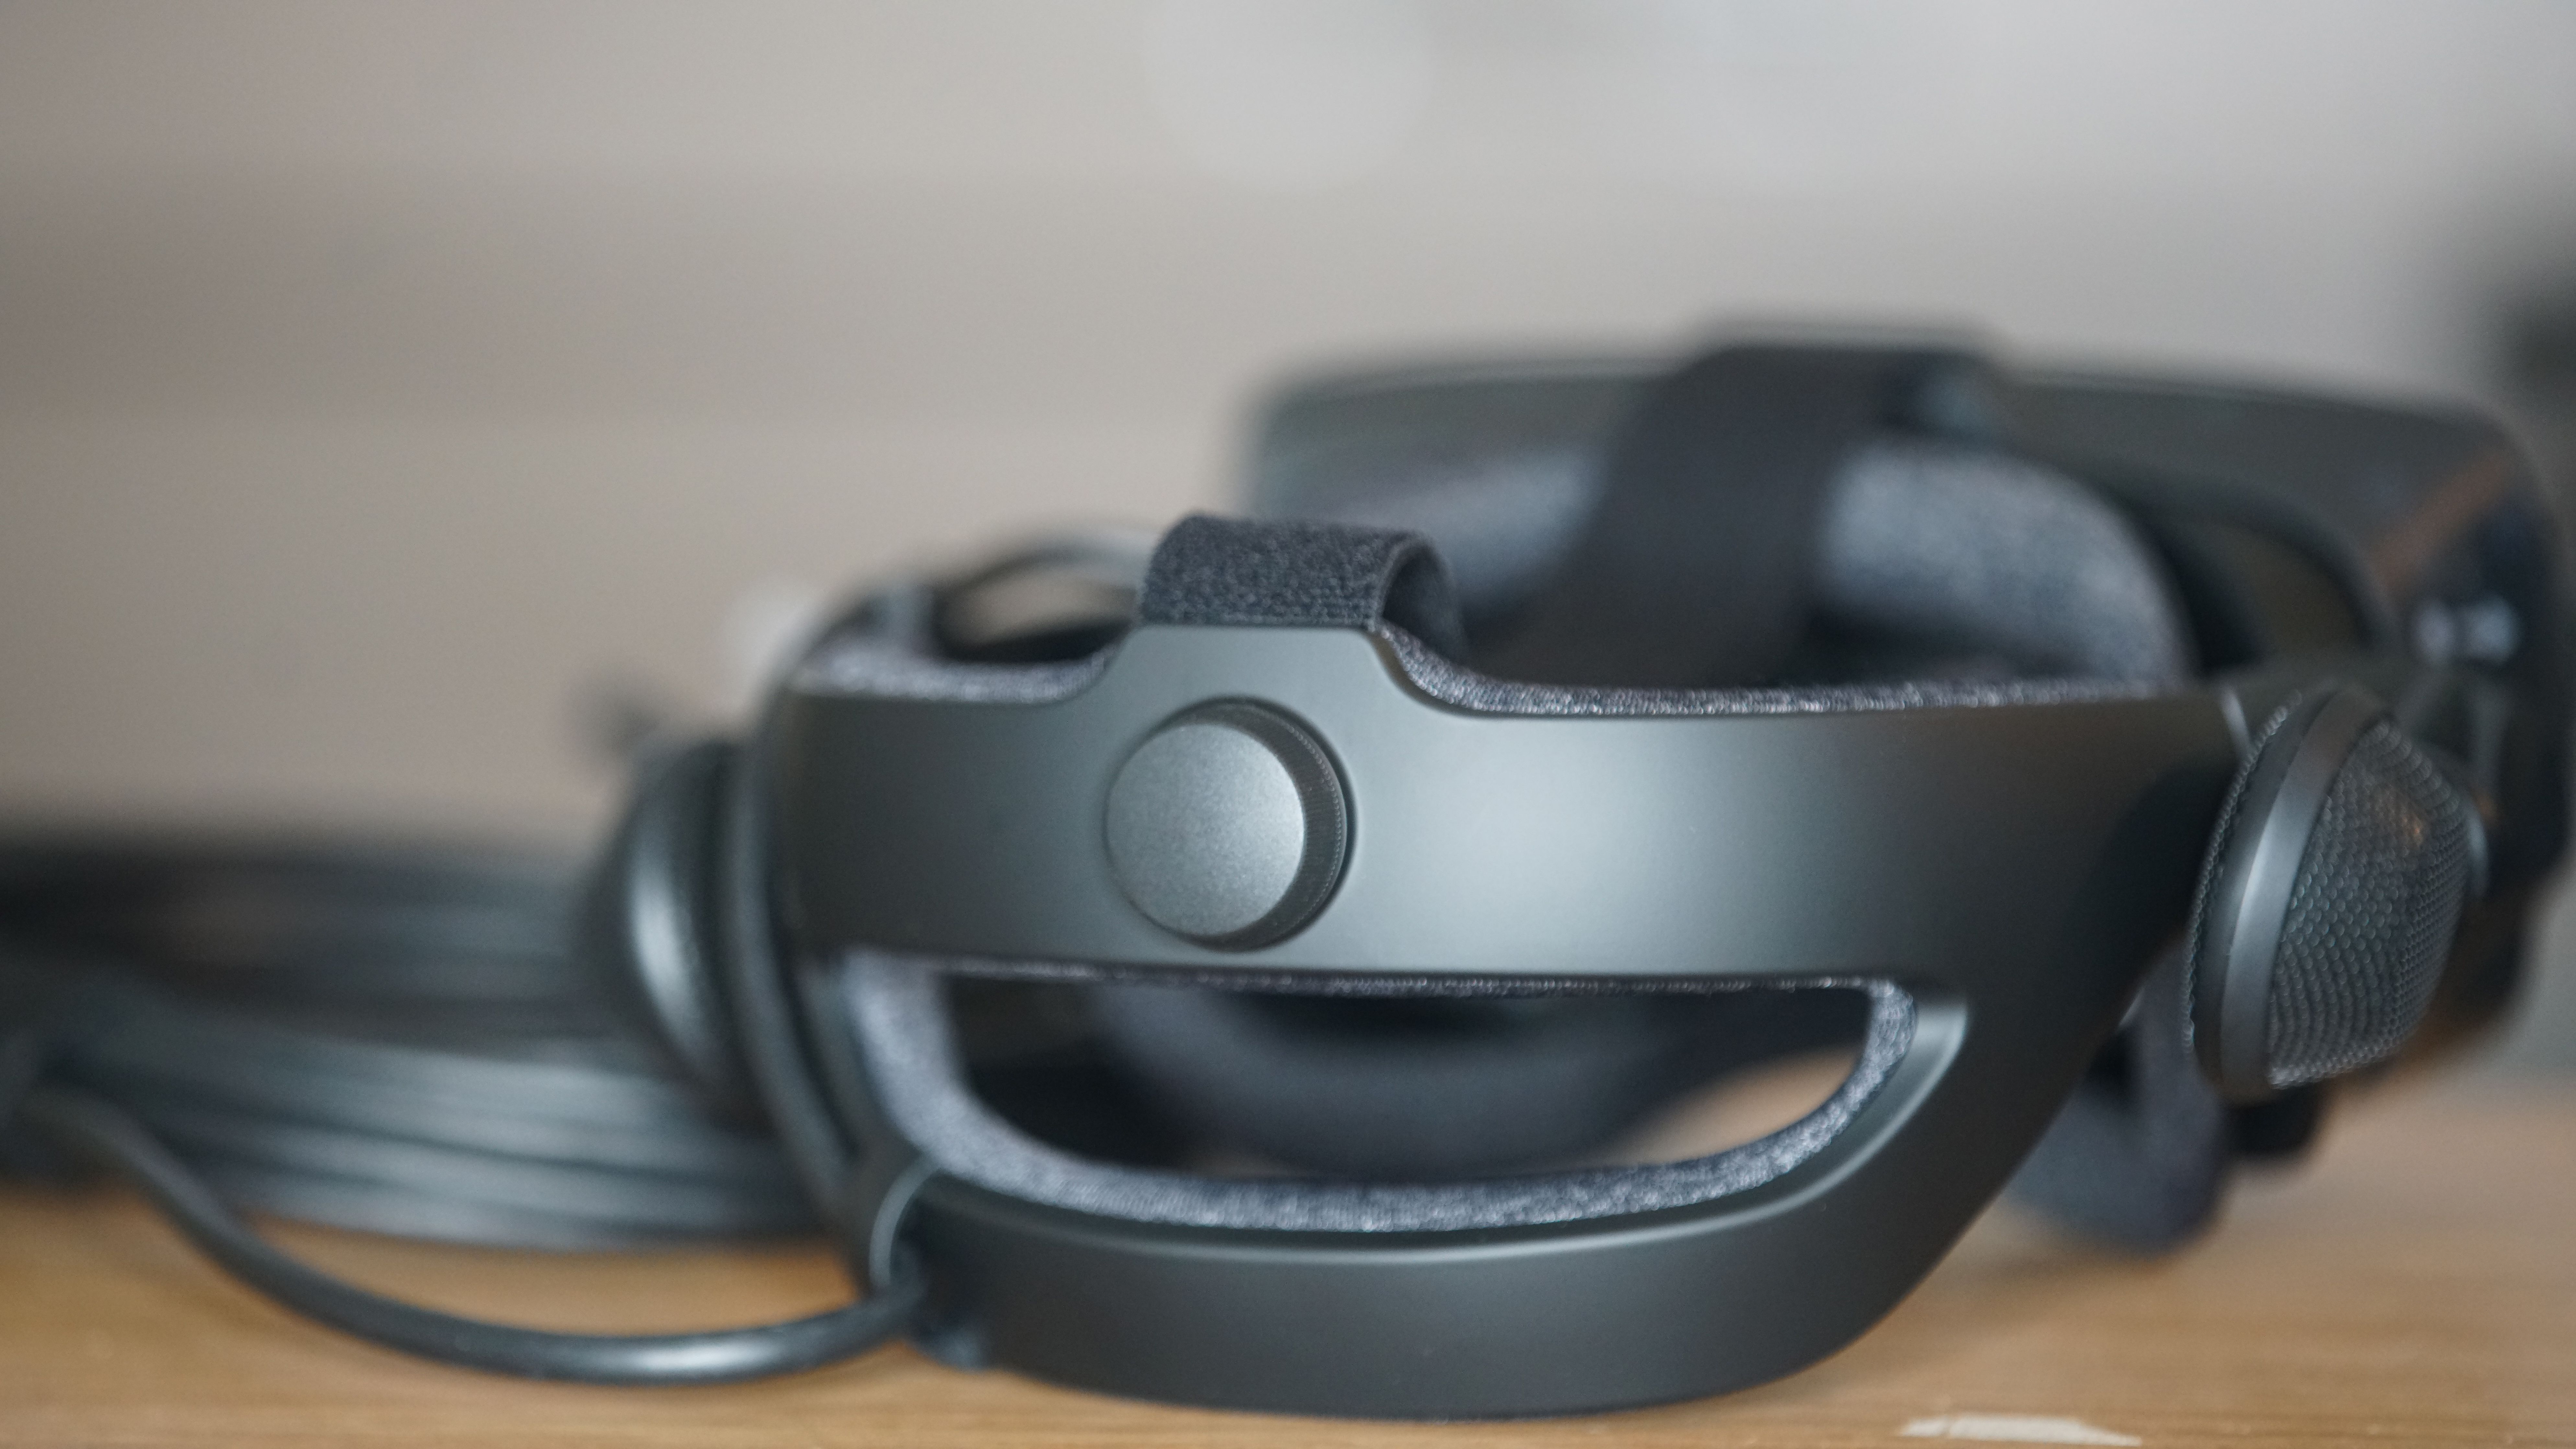 Oculus Rift S review: The second generation of PC-based virtual reality  comes with caveats